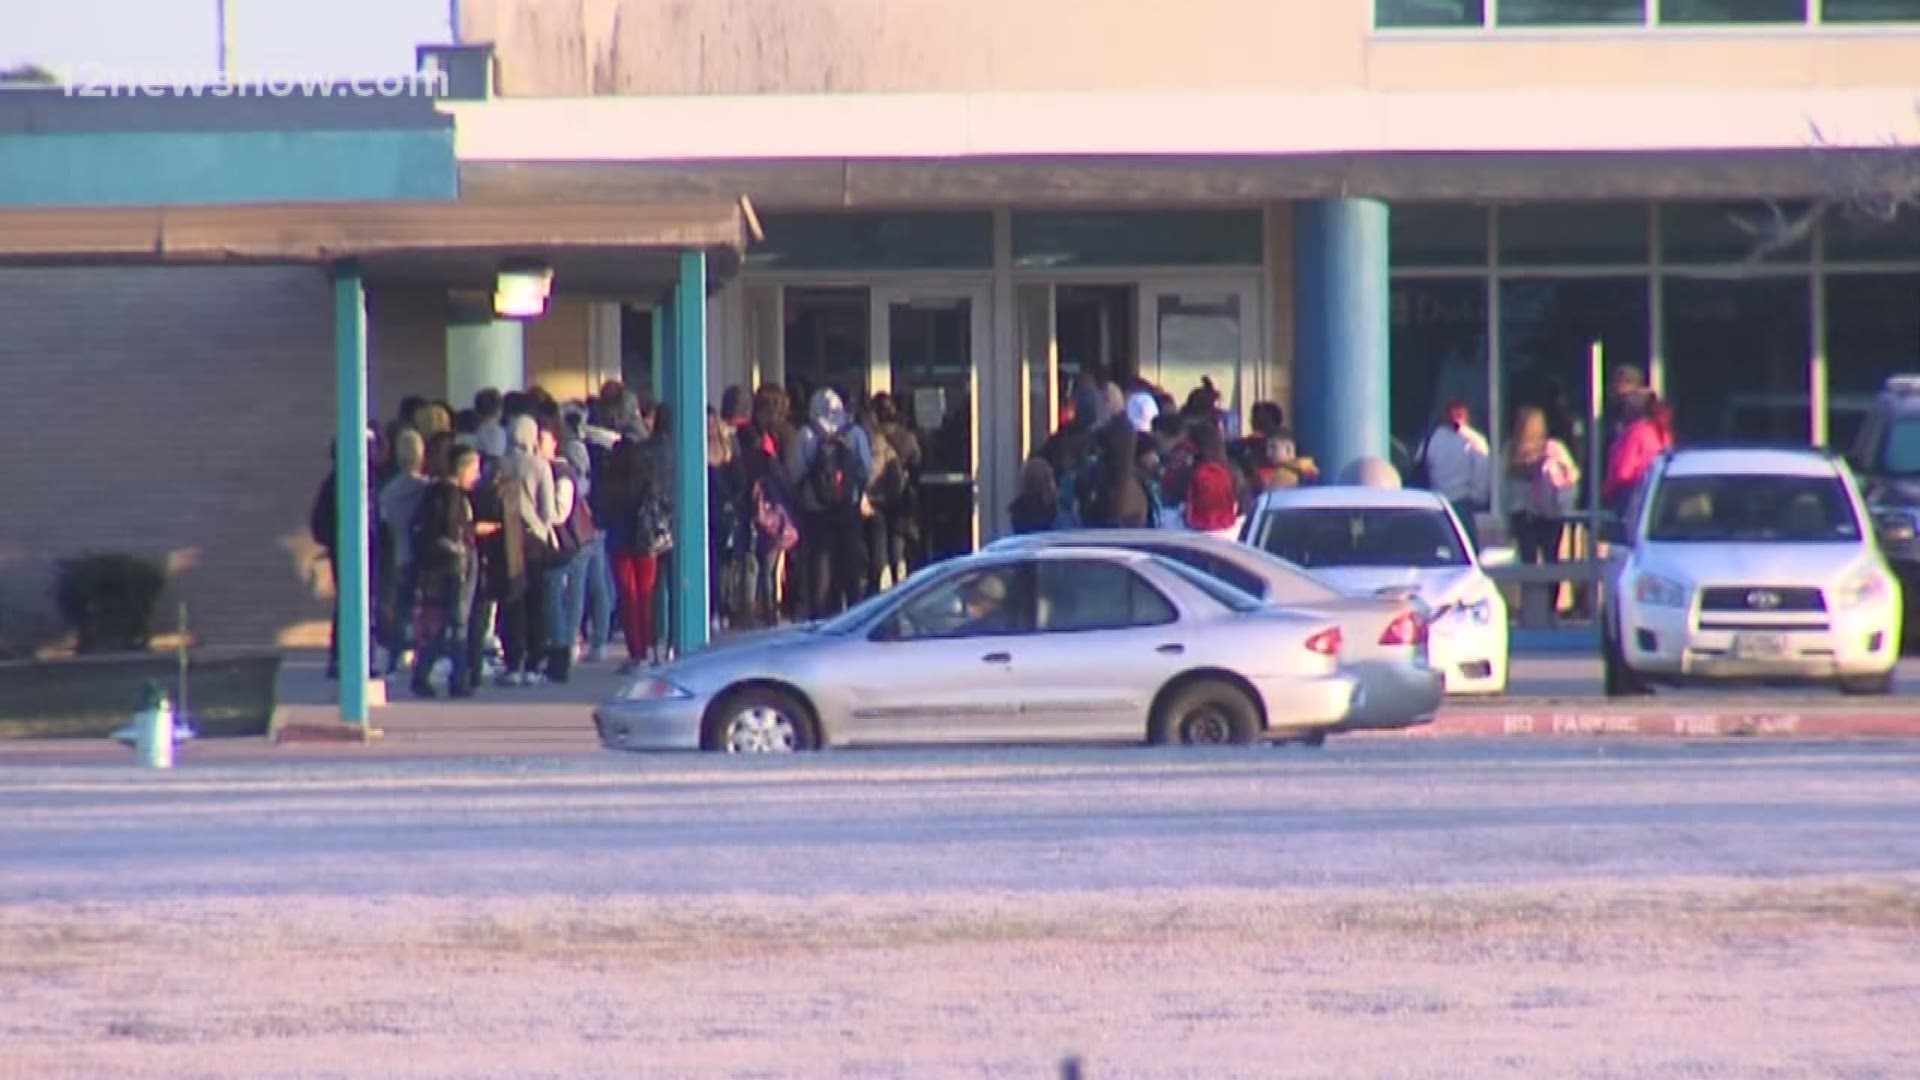 Students at West Brook High School showed up to a new security system this morning. The district is testing out a new metal detector pilot program.